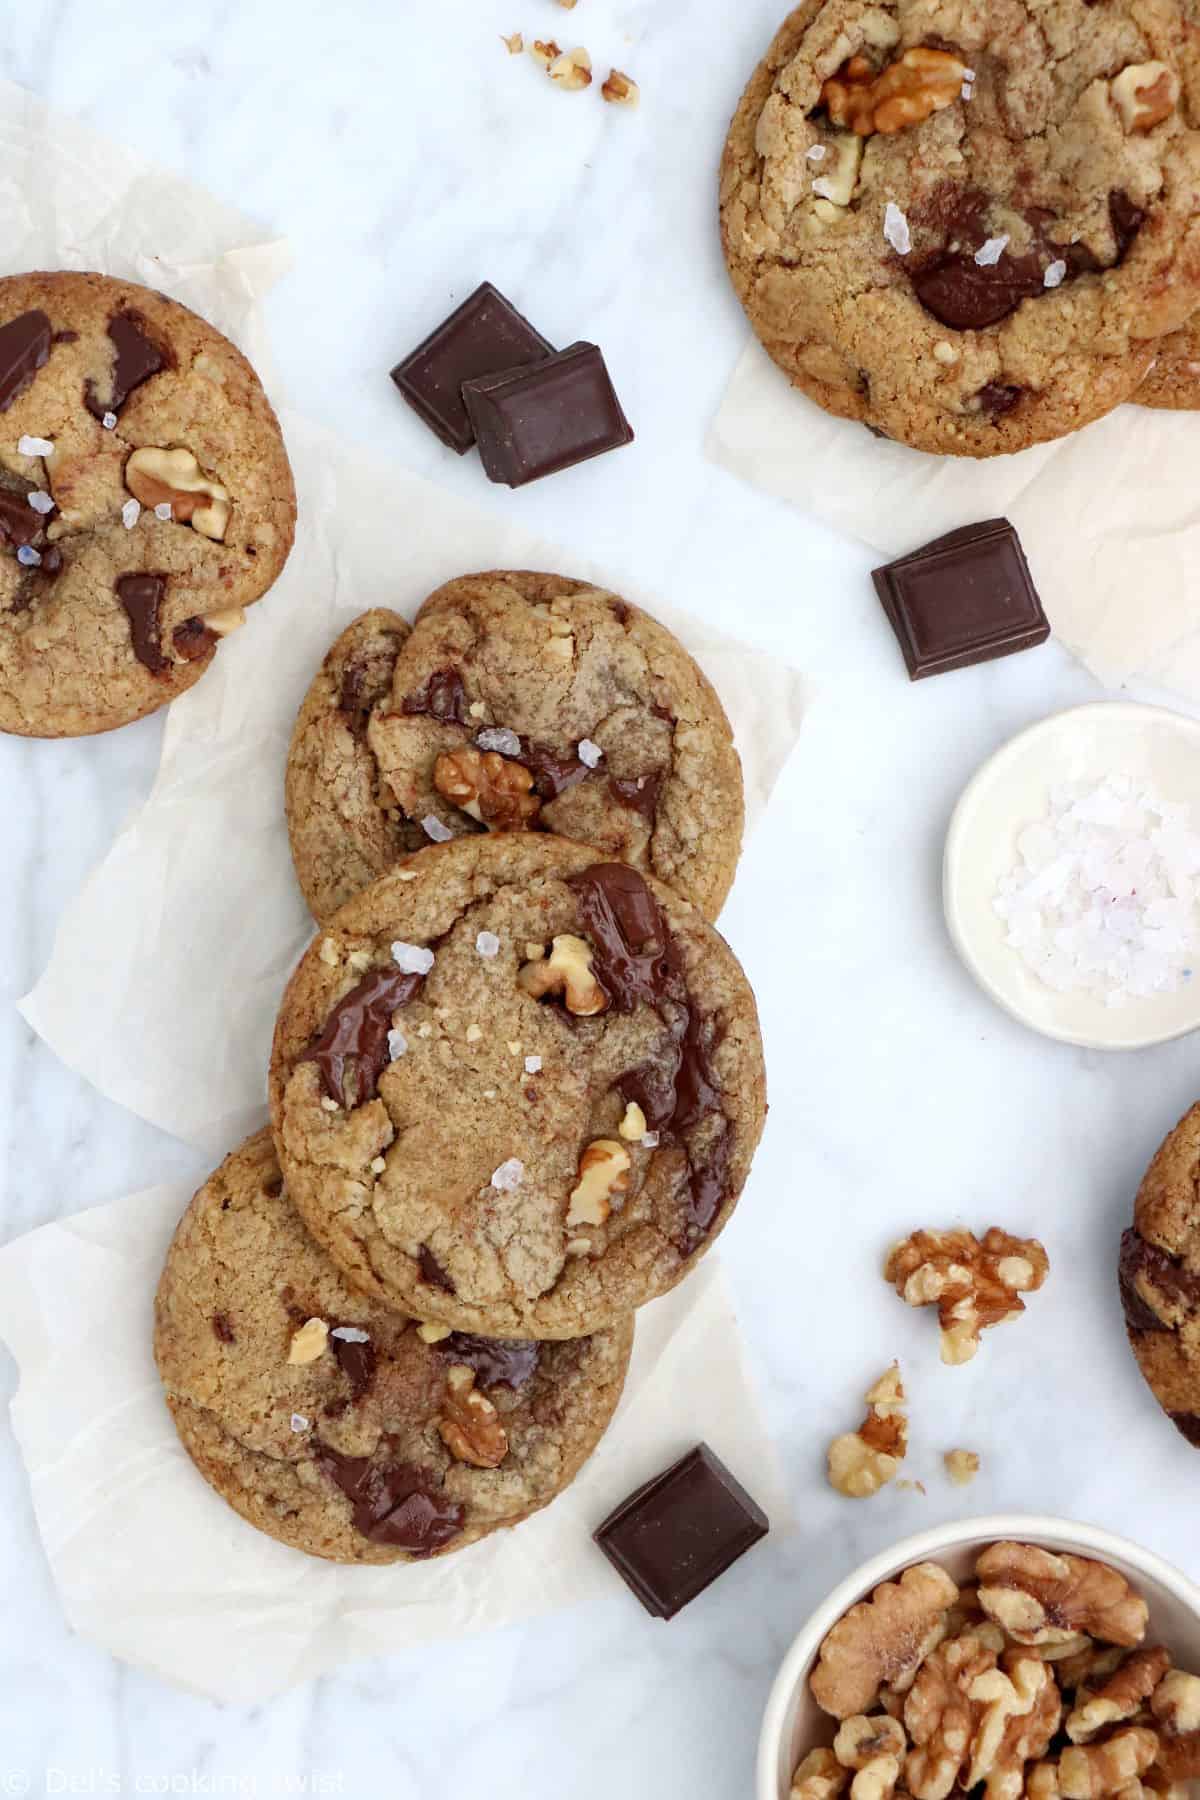 Both crunchy and chewy, these brown butter walnut chocolate chip cookies are truly out of this world. The brown butter also adds some delicious nutty flavors.